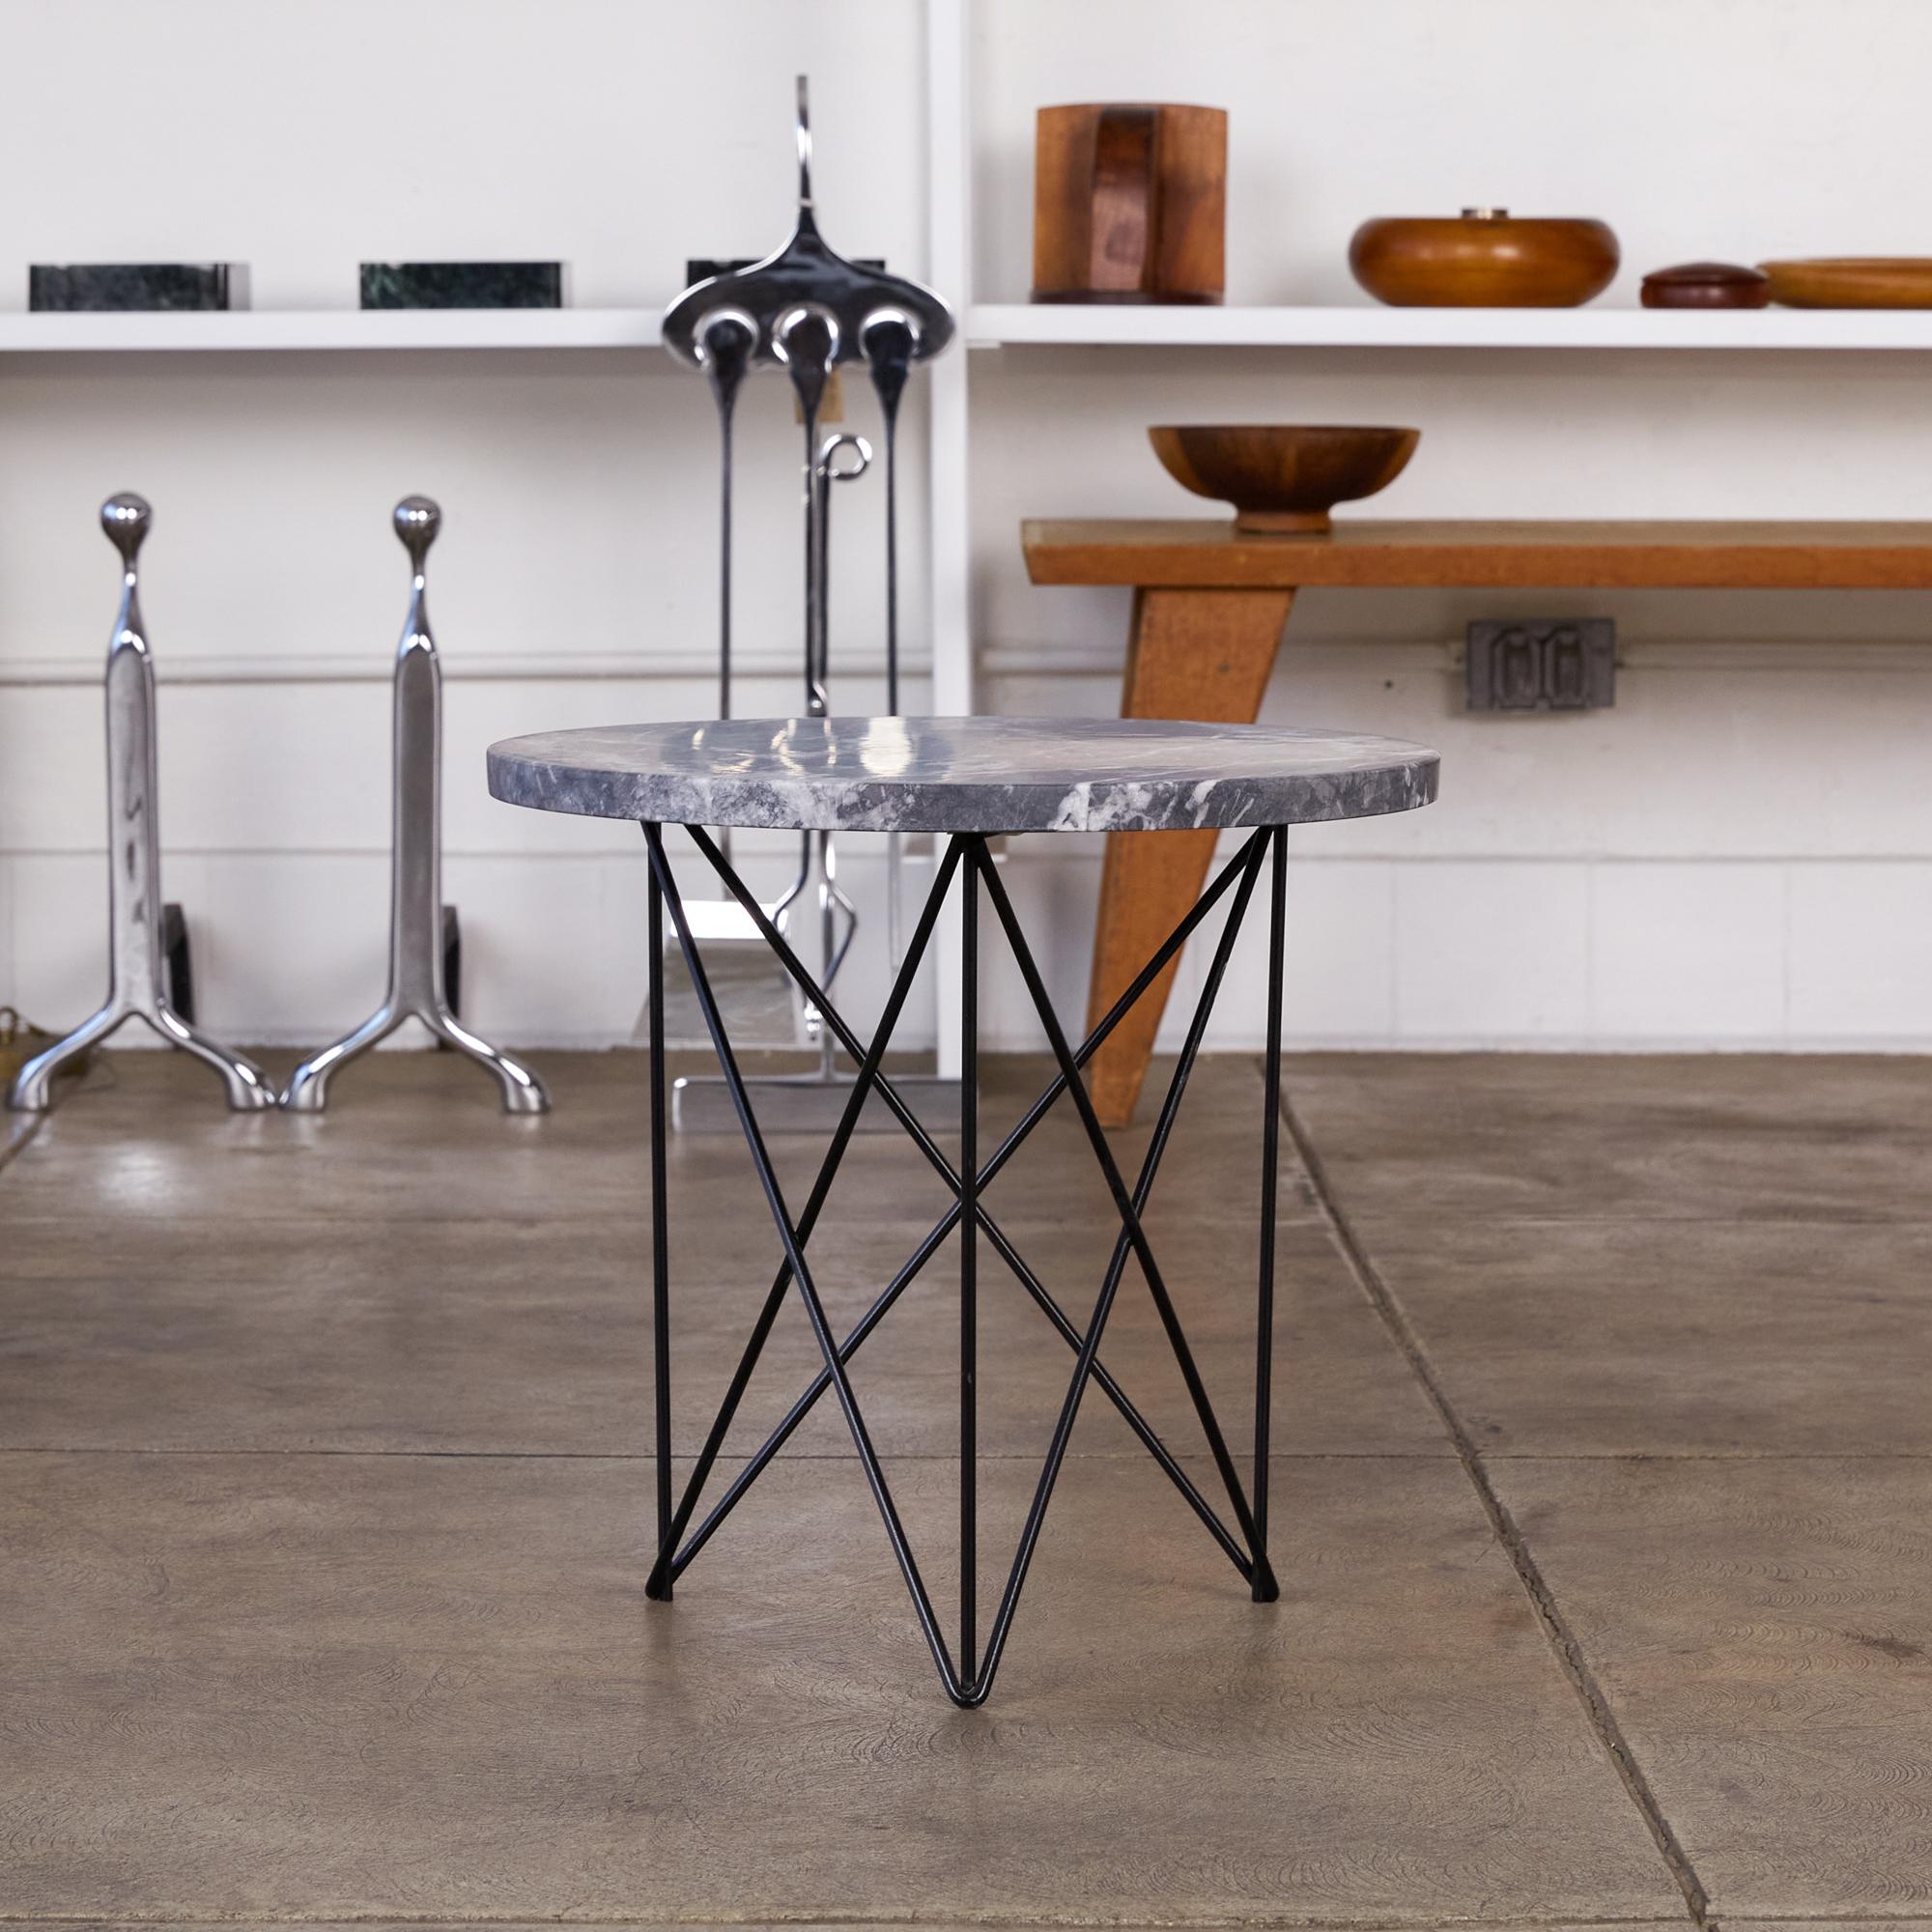 Mid-20th Century Martin Perfit Marble Side Table with Hairpin Legs